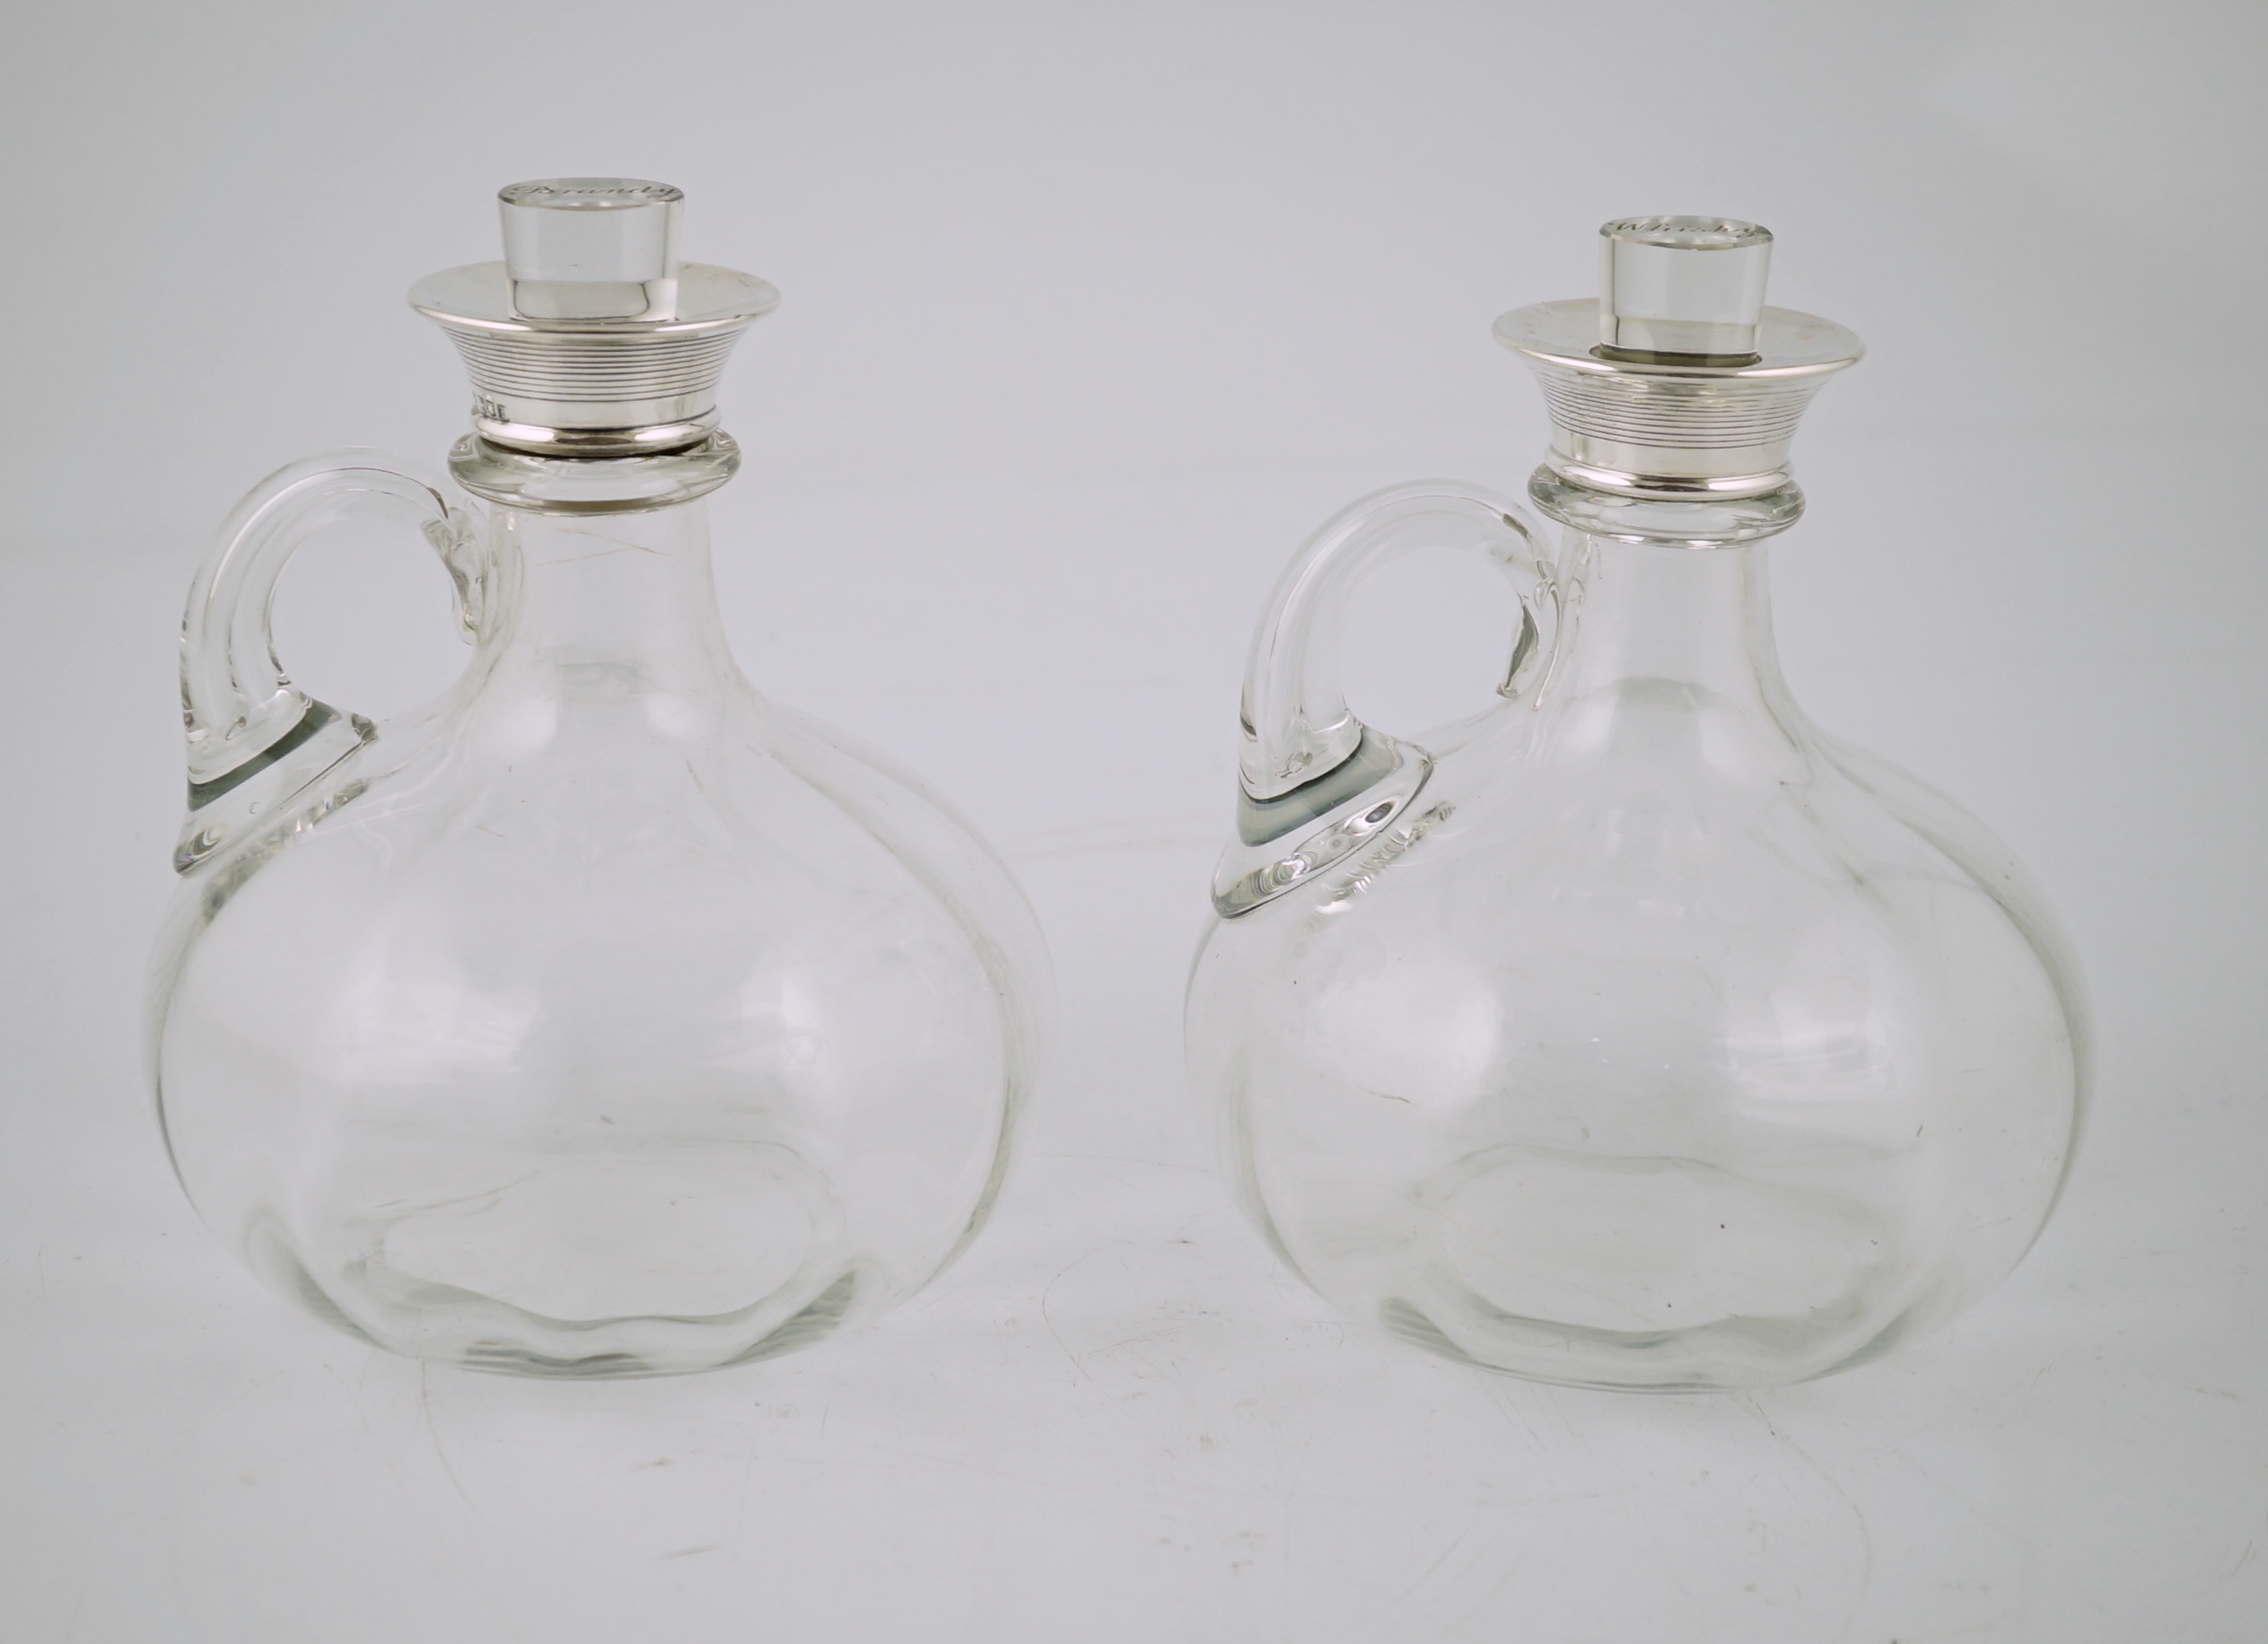 A pair of Edwardian silver mounted glass decanters, with stoppers etched 'Whisky' & 'Brandy', by Charles & George Asprey